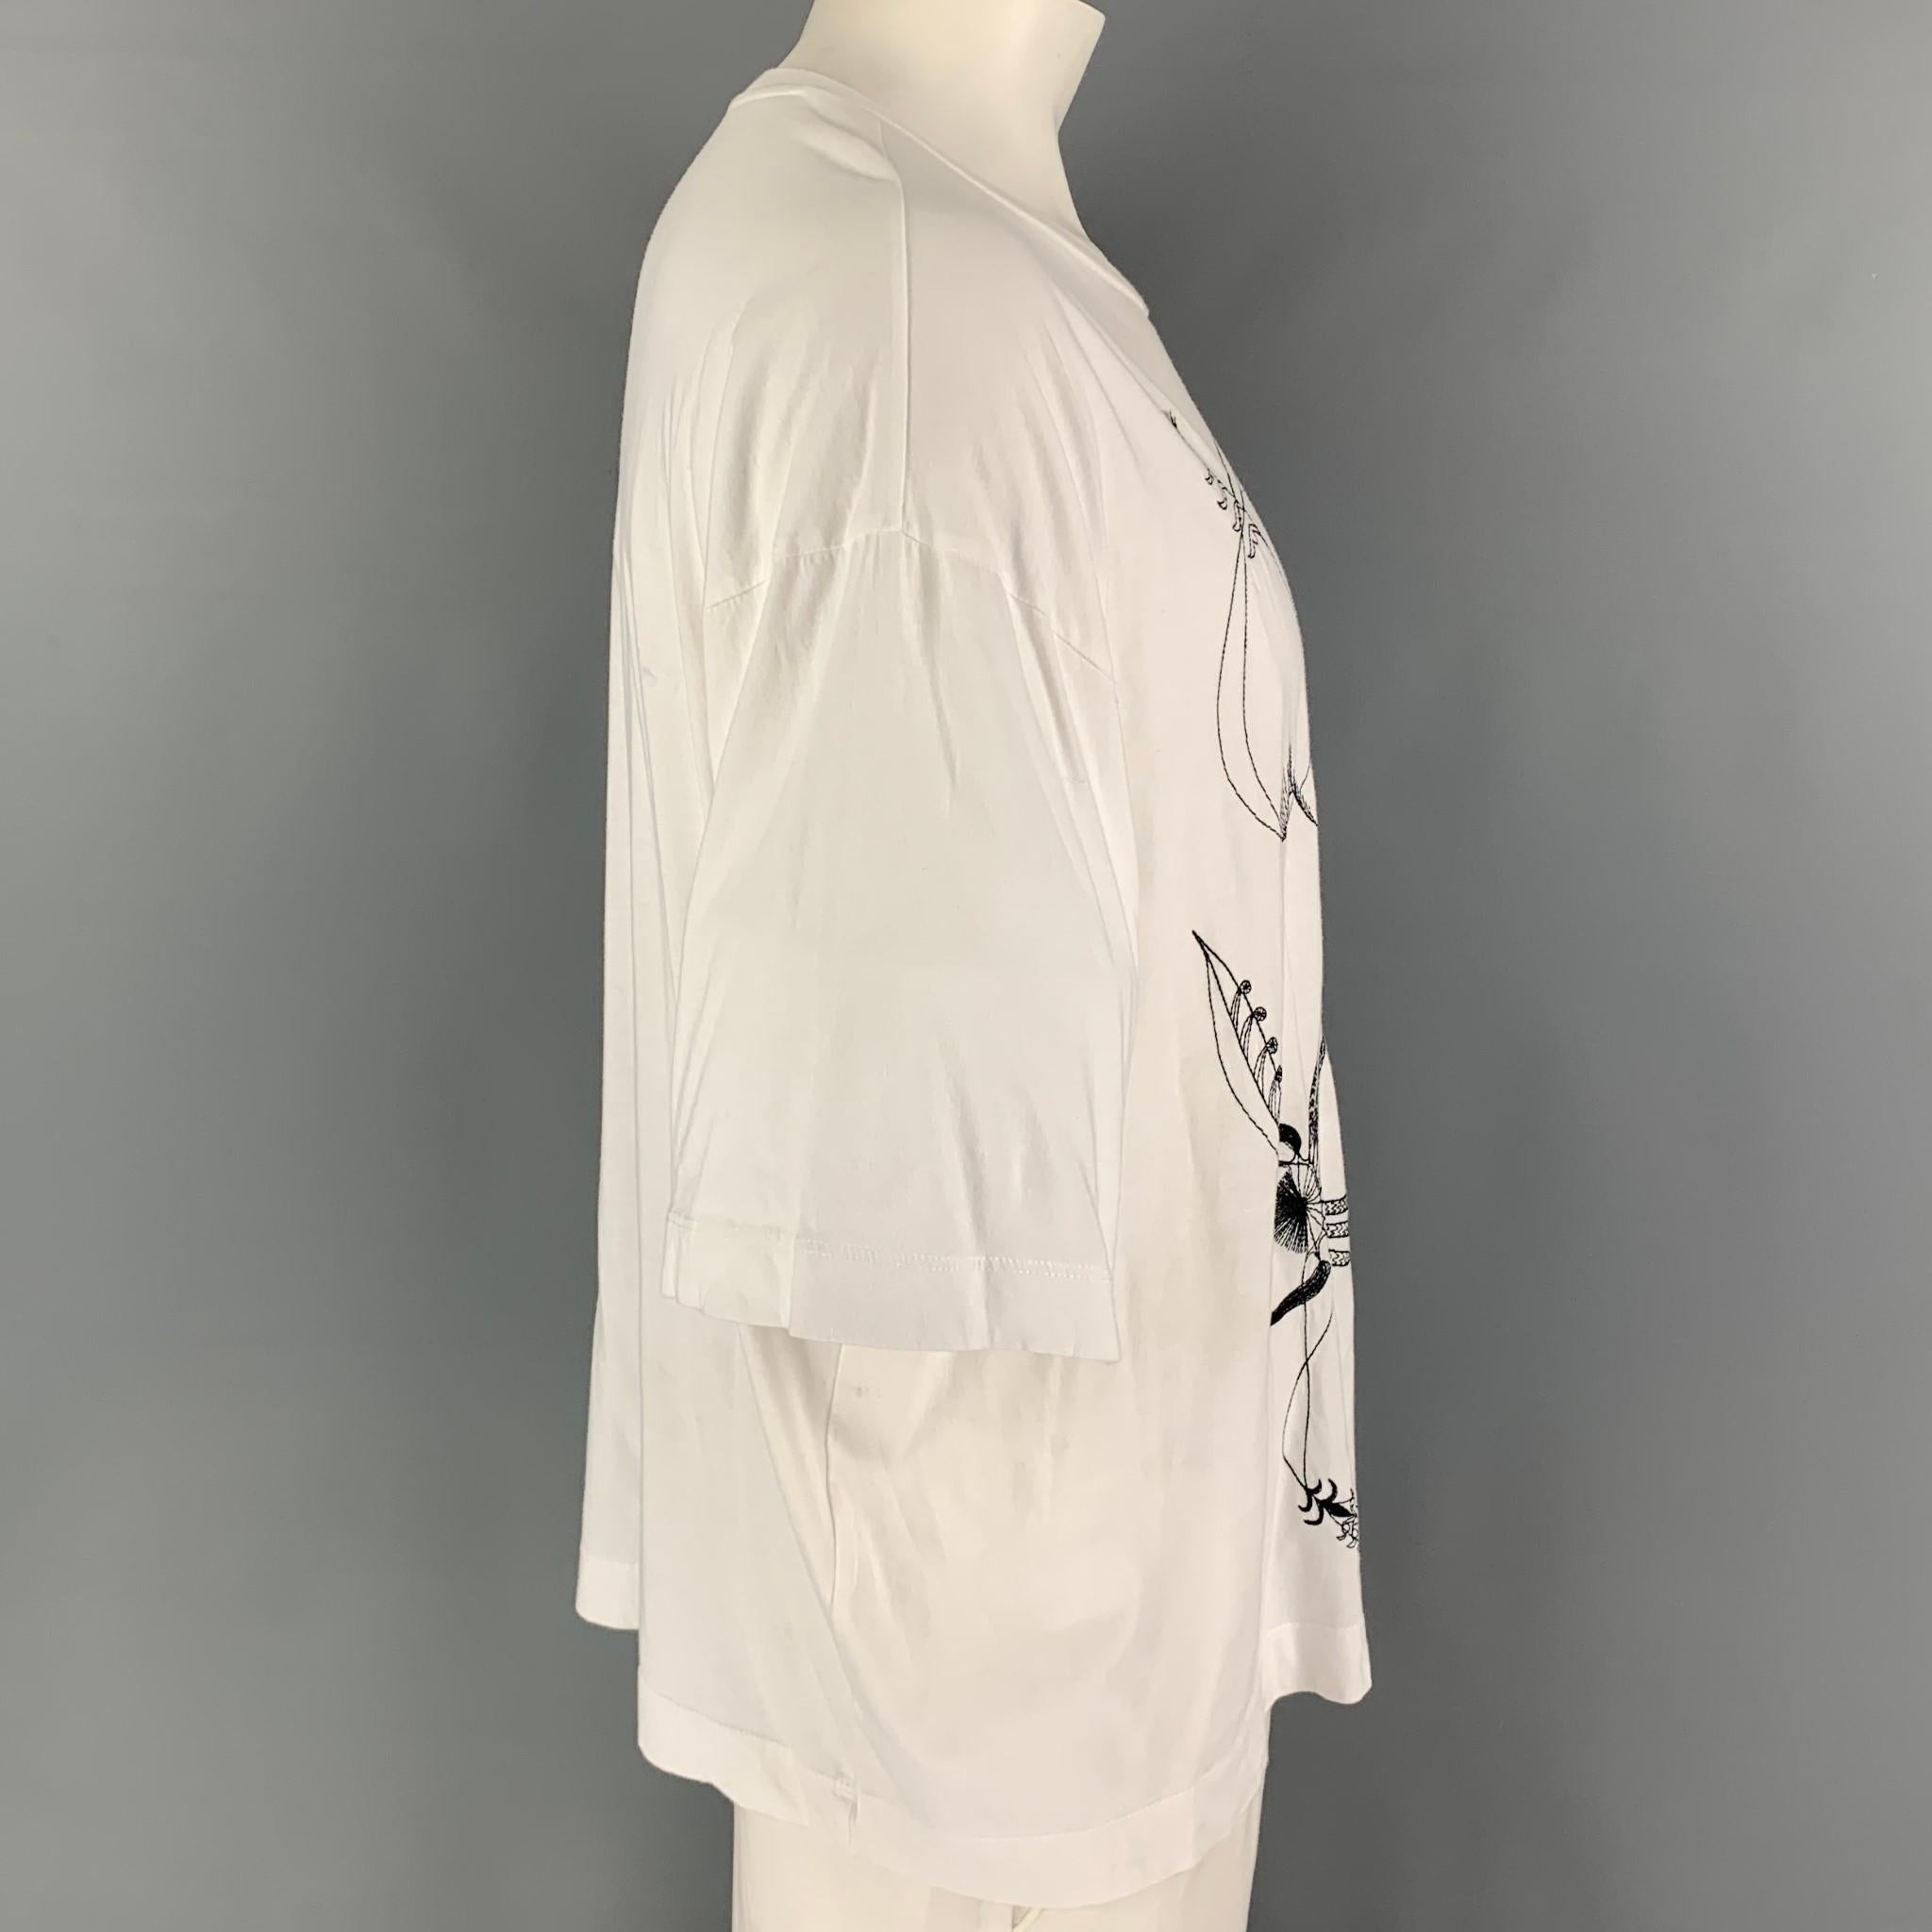 DRIES VAN NOTEN t-shirt comes in a white & black cotton featuring embroidered designs and a crew-neck. 

Good Pre-Owned Condition. Moderate discoloration throughout. As-is.
Marked: M

Measurements:

Shoulder: 26 in.
Chest: 48 in.
Sleeve: 10.5